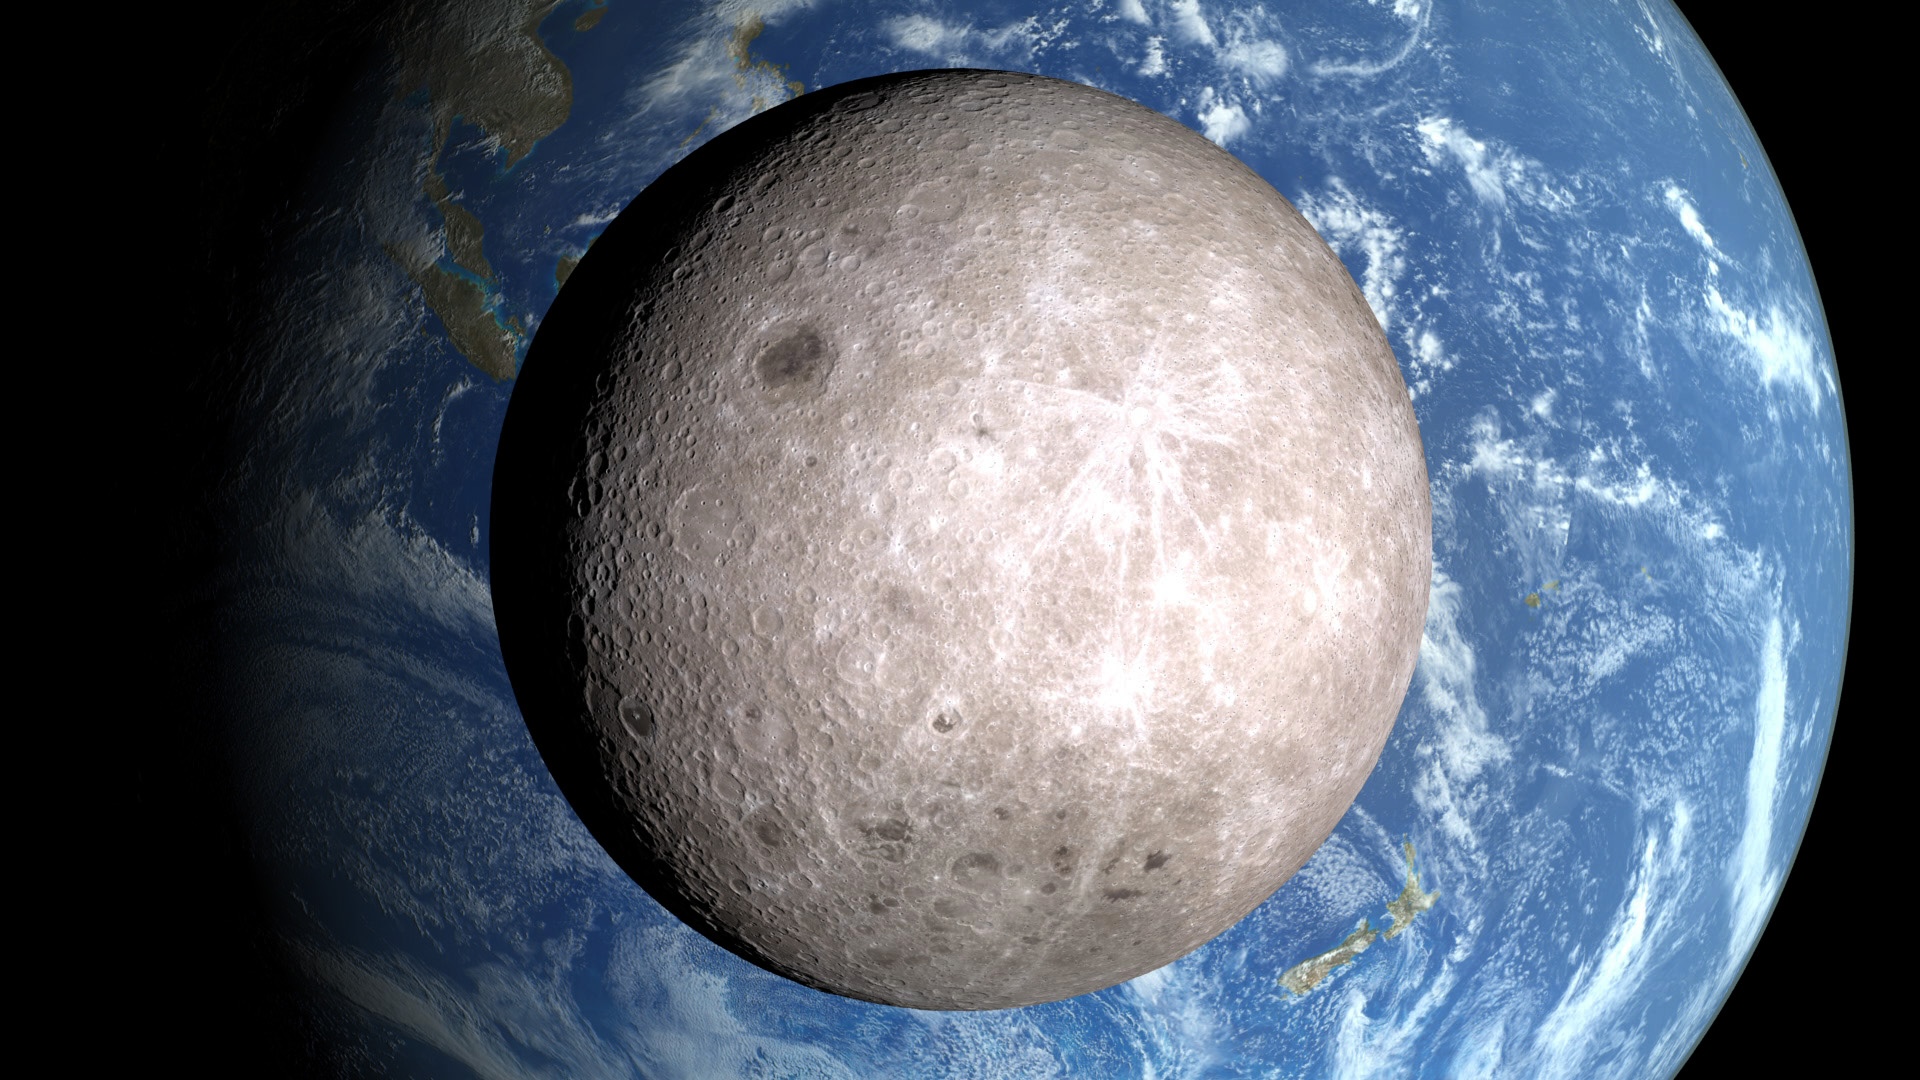 Why can't we see the far side of the moon?